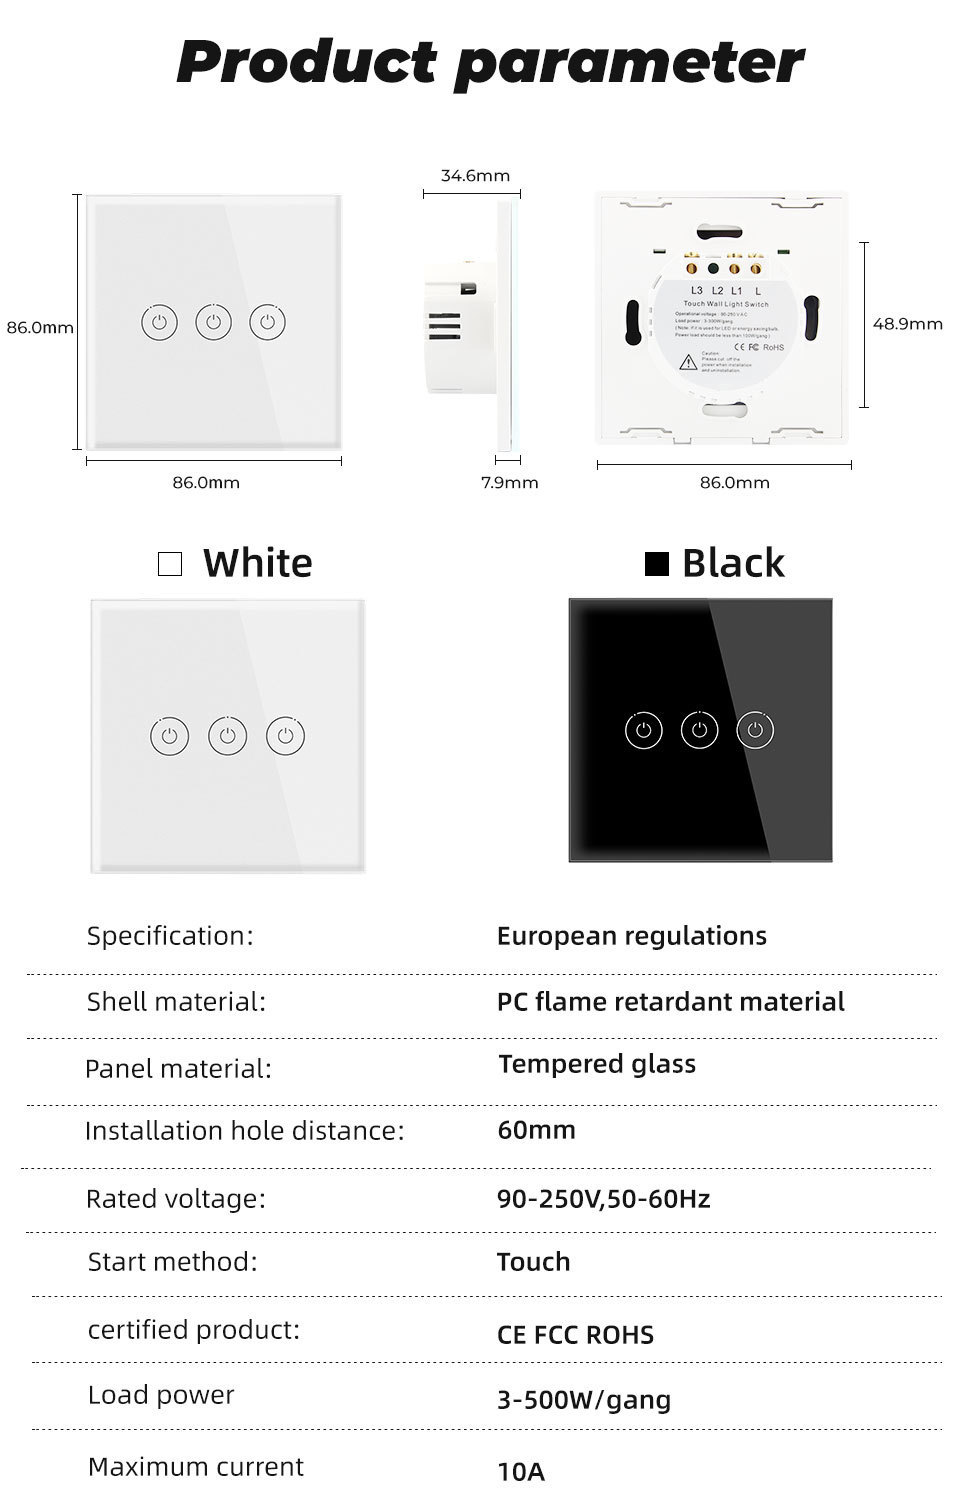 White-Touch-Tempered-Glass-European-Regulations-Smart-Light-Wall-Switch-Panel-Home-Hotel-Villa-Smart-1753923-12